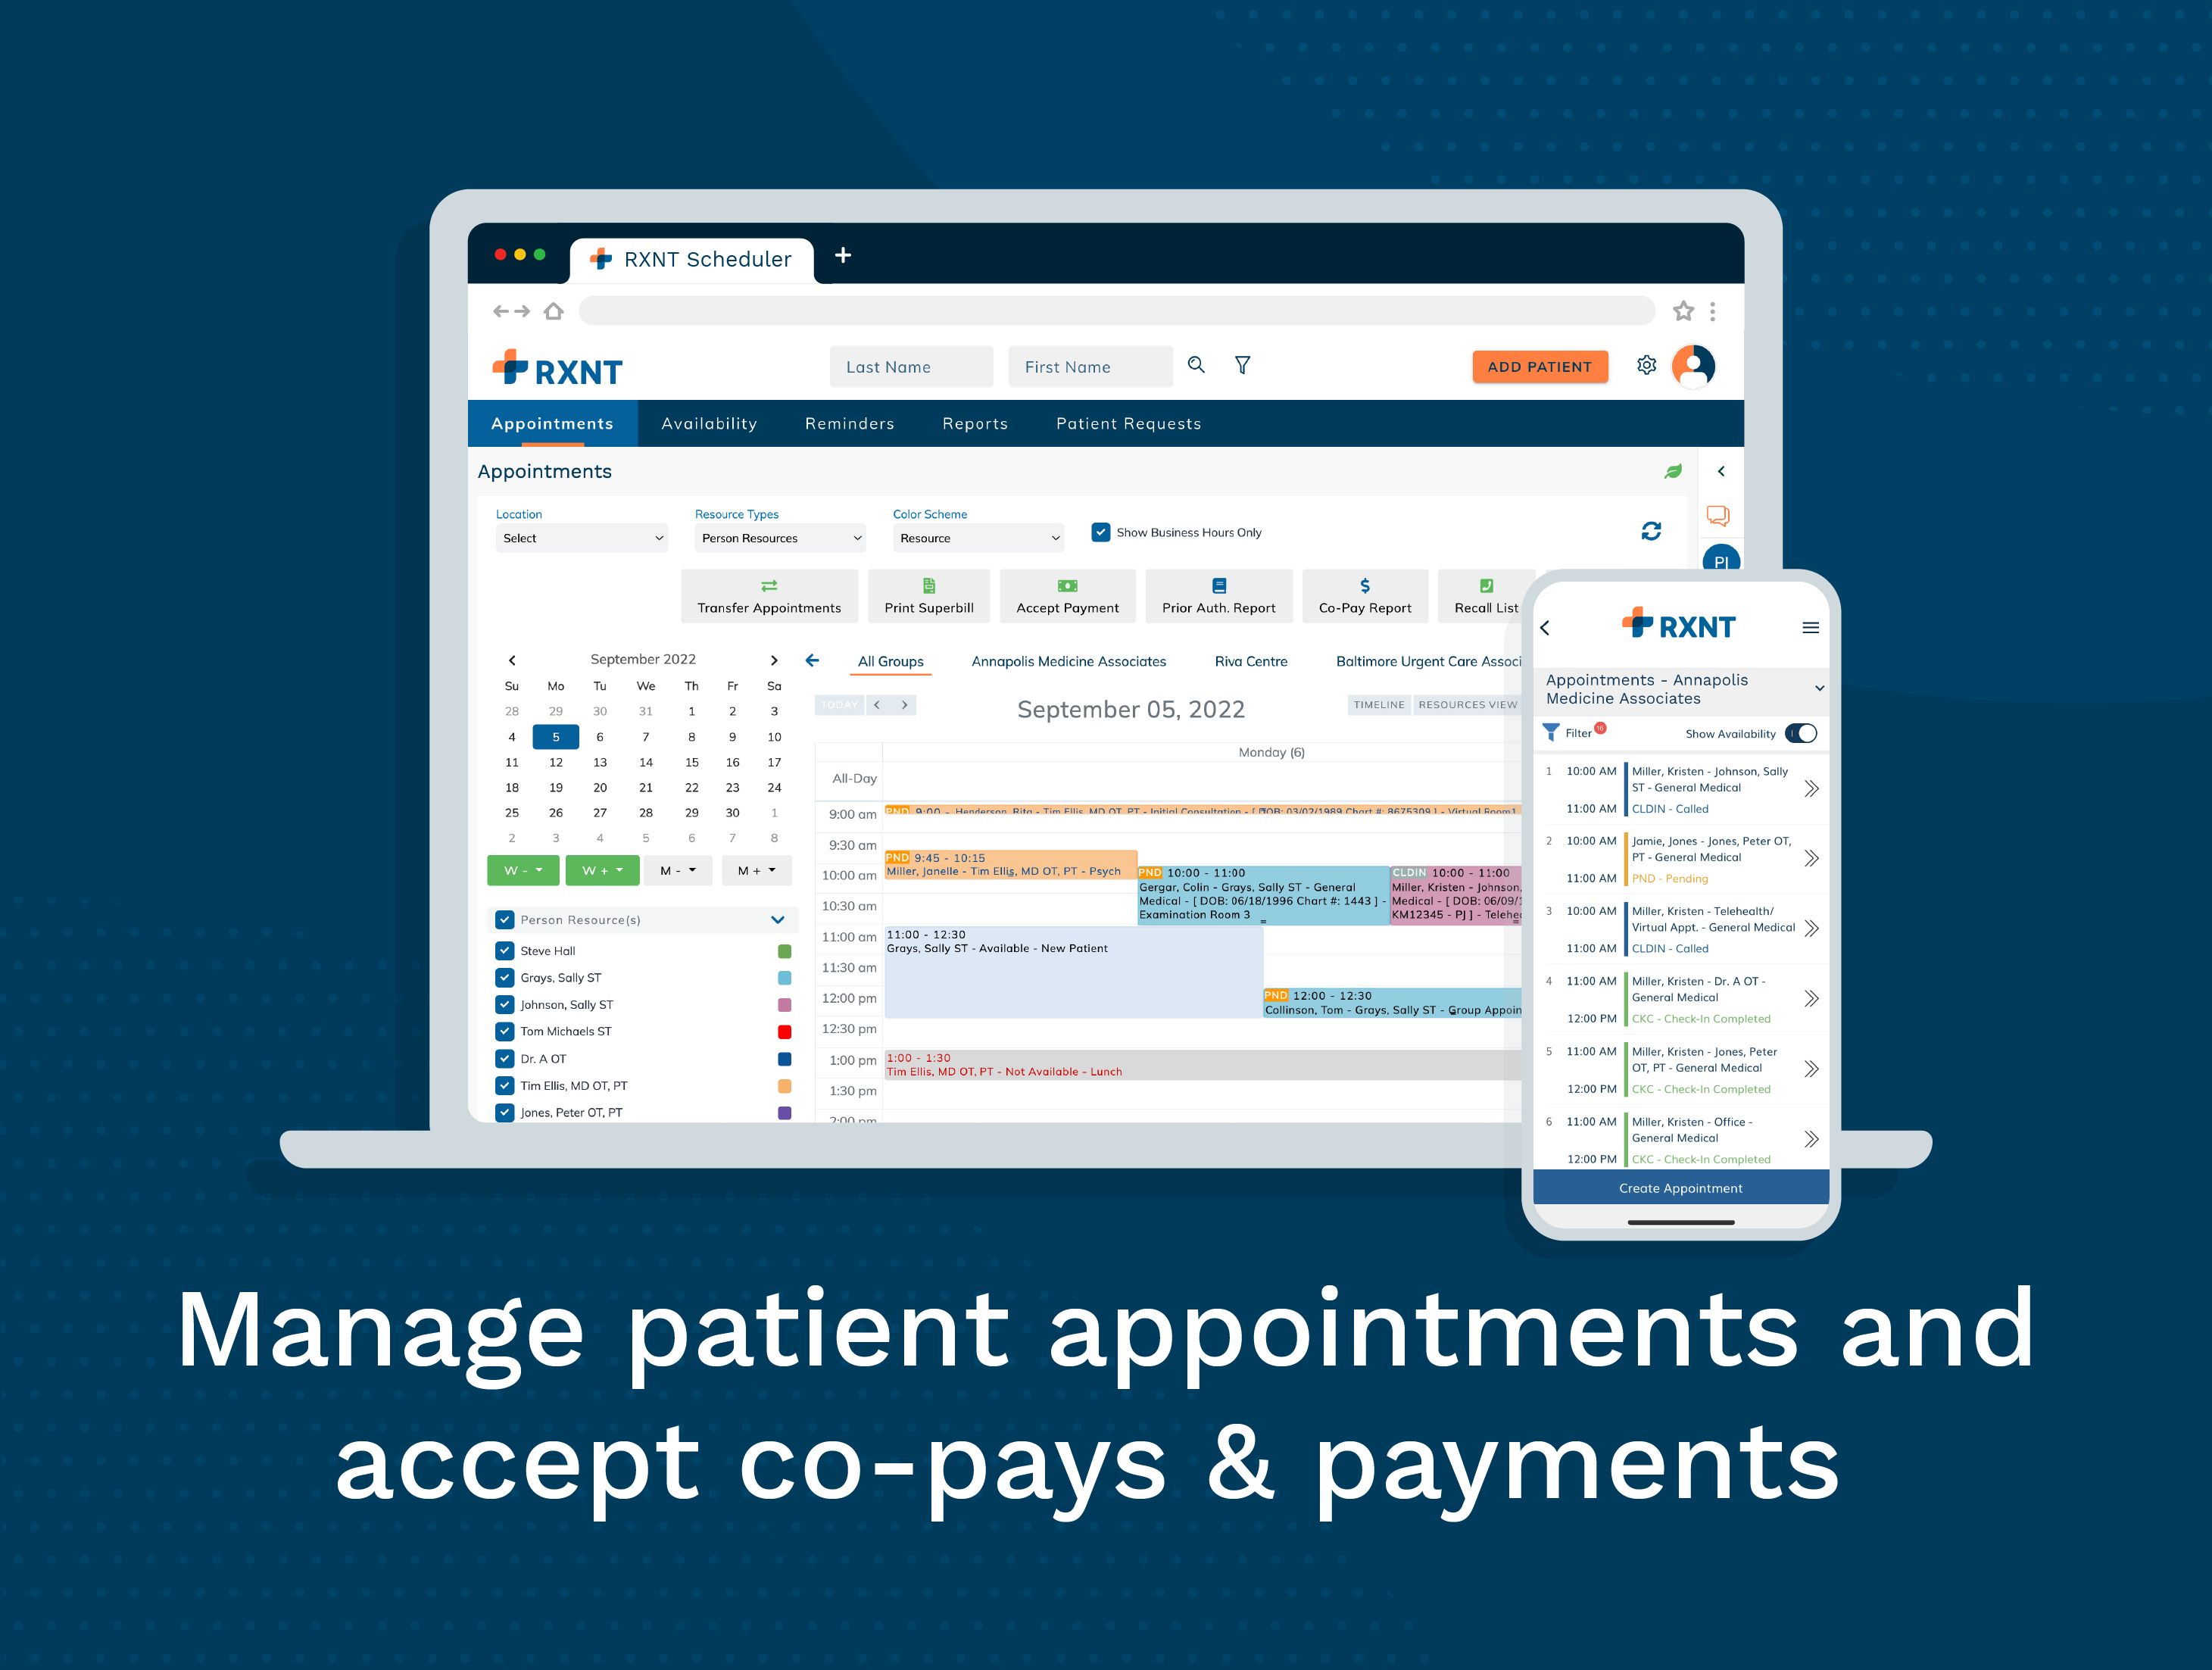 RXNT Practice Scheduling Software. Manage daily, weekly, and monthly patient appointments for providers and treatment rooms, track multiple locations, and accept co-pays & payments at check-in. Available for desktop, tablet, & mobile (iOS & Android).